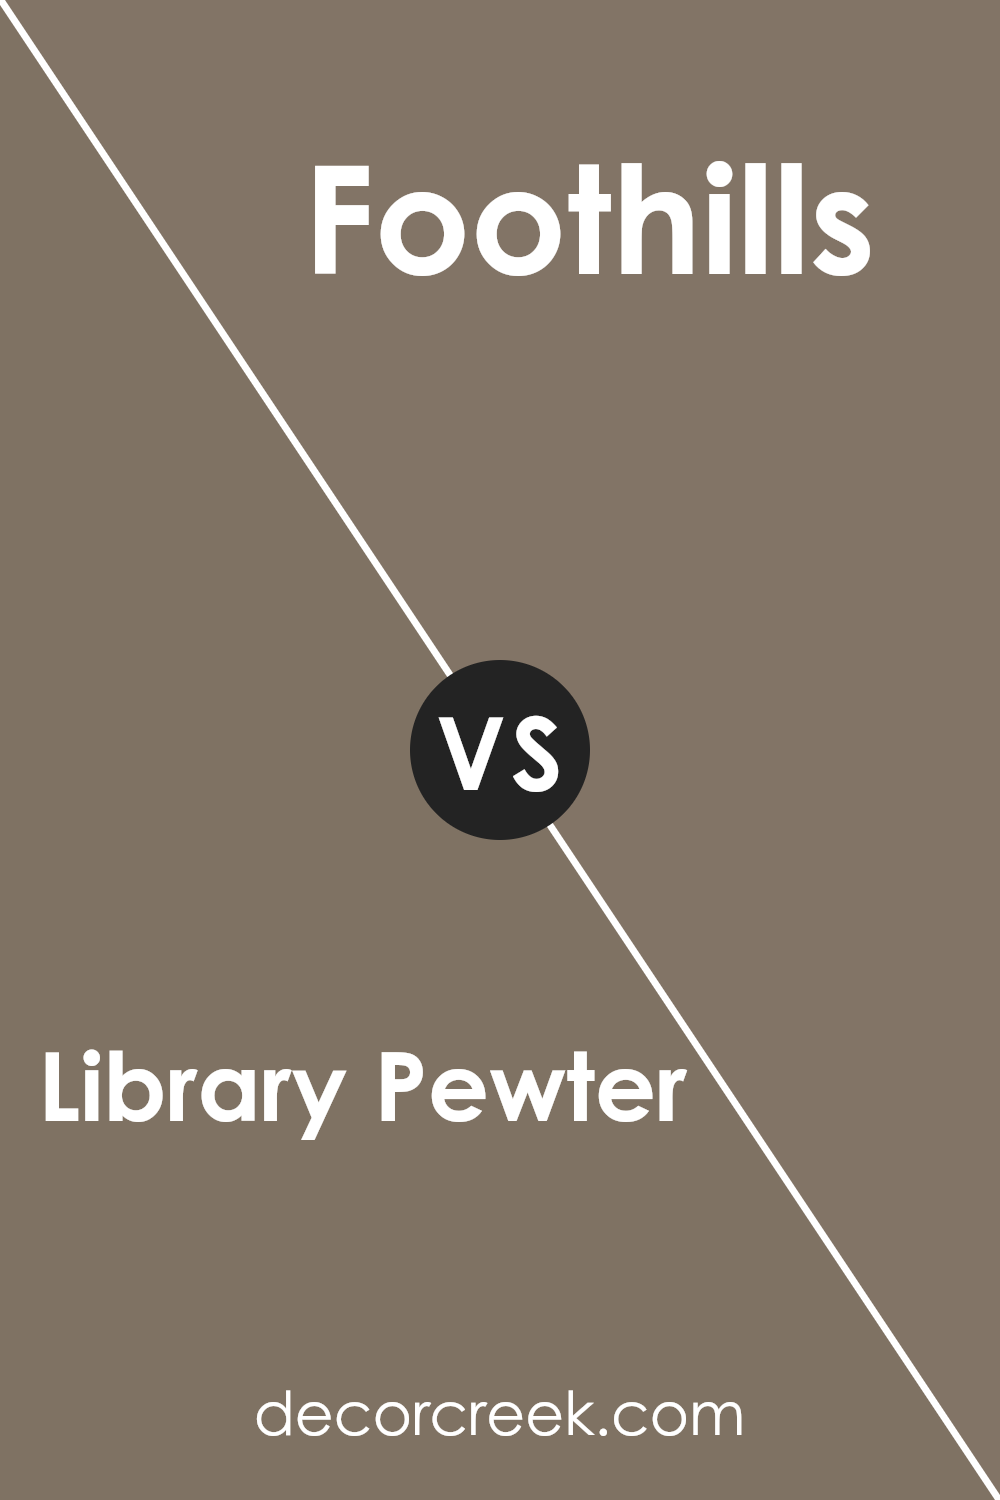 library_pewter_sw_0038_vs_foothills_sw_7514